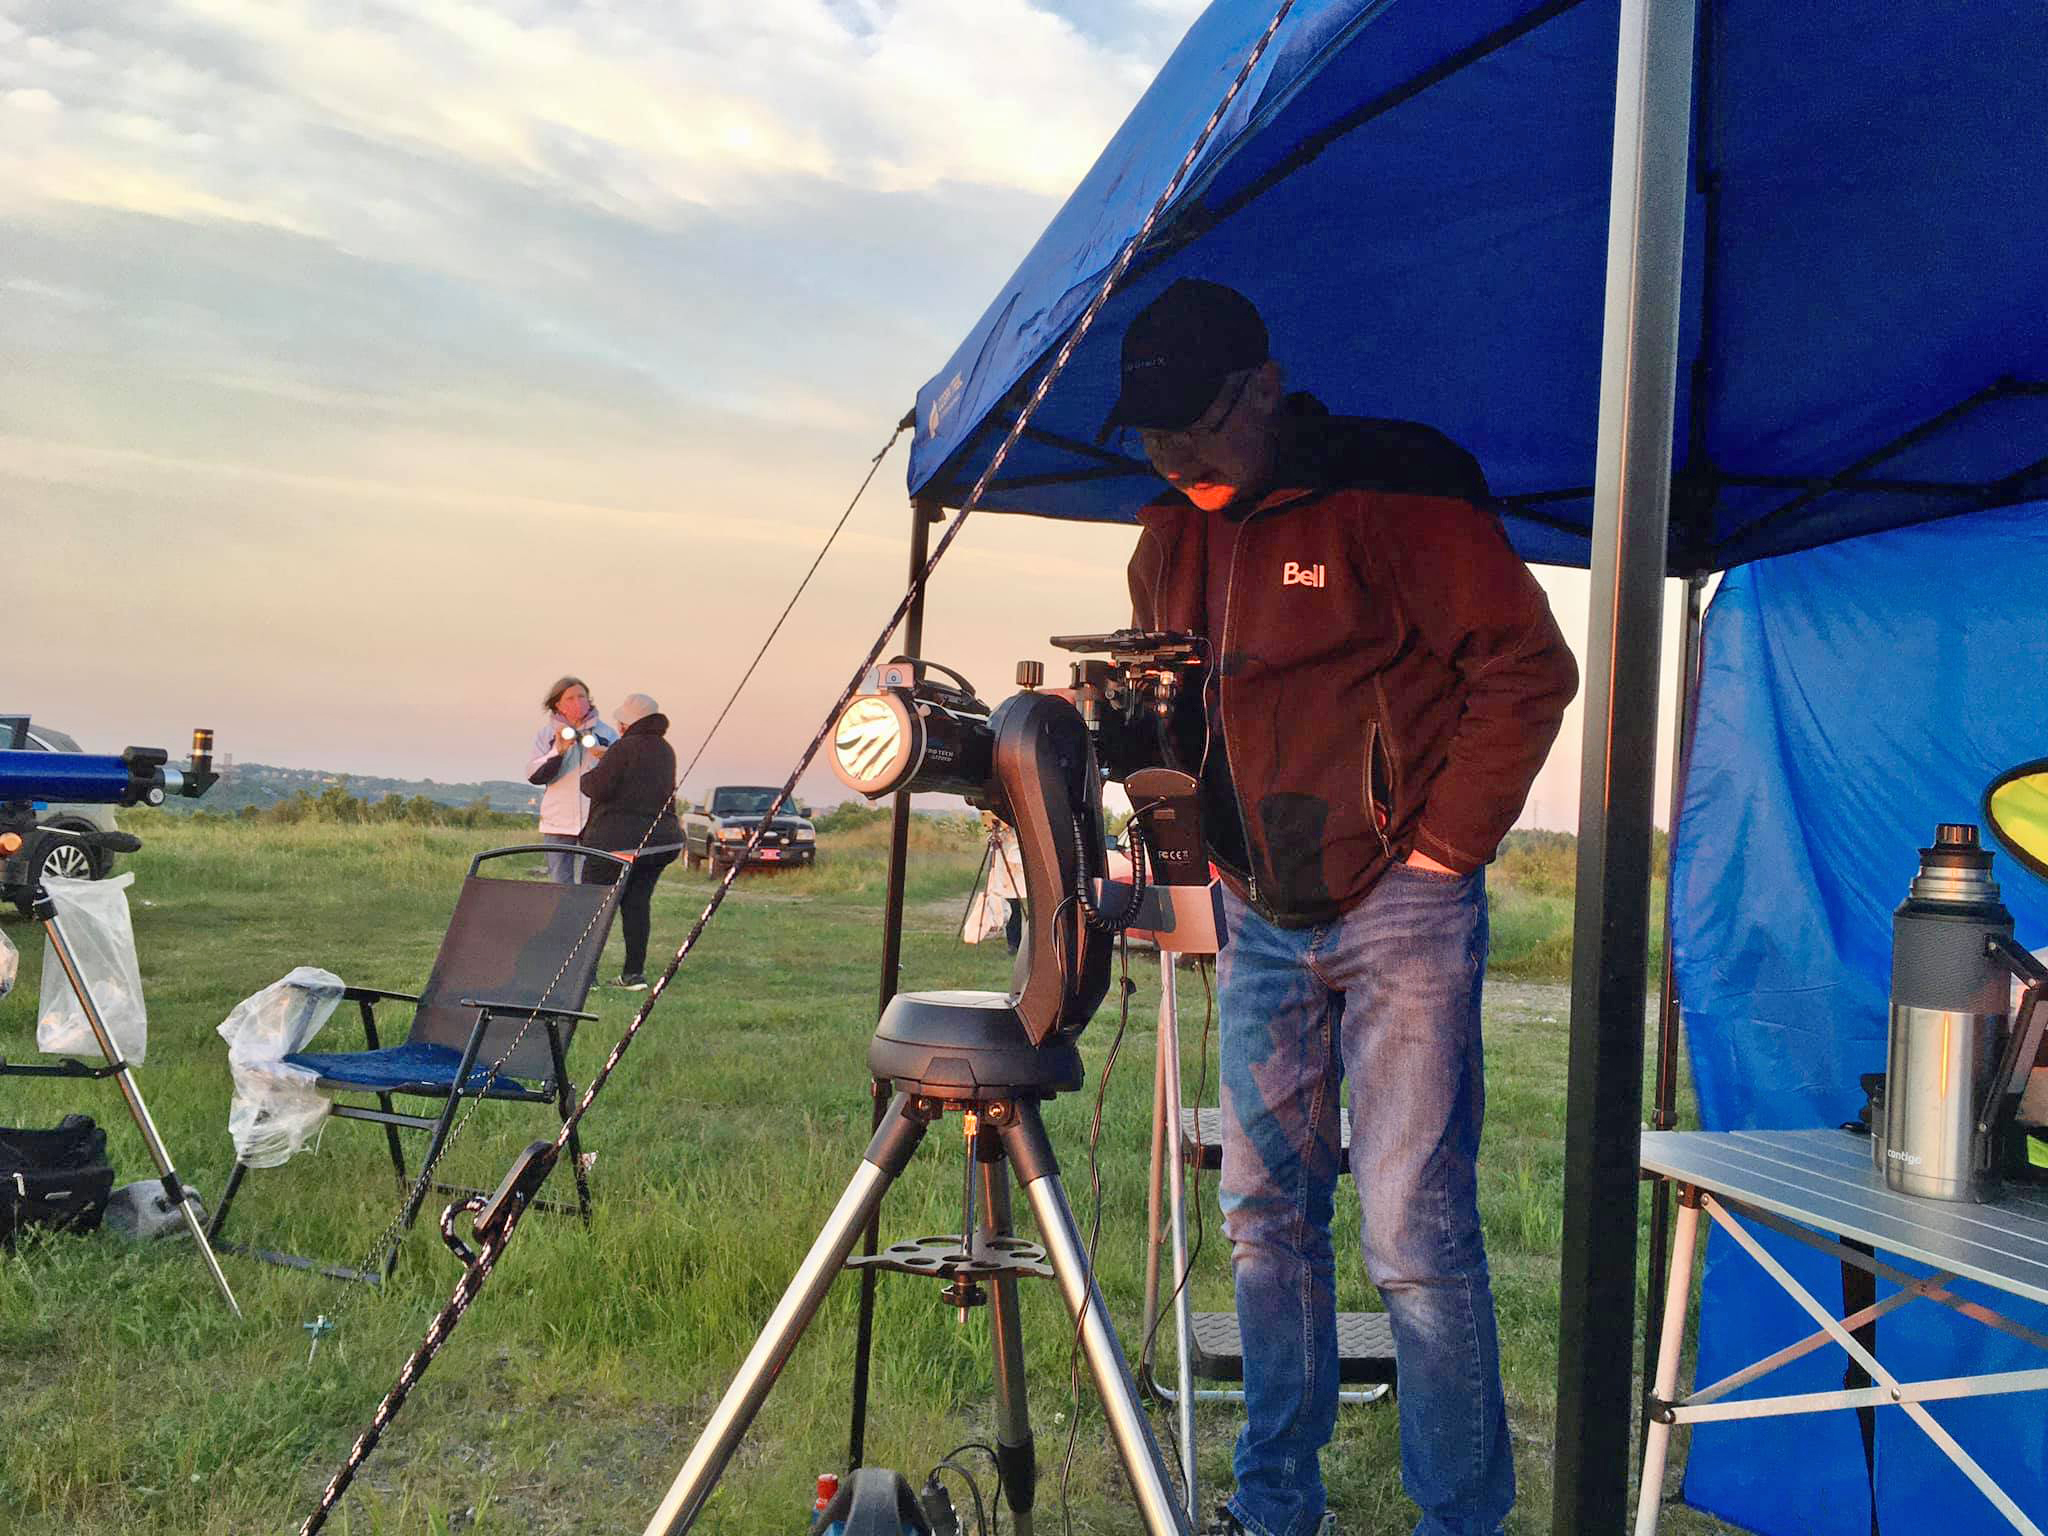 Chris Curwin of the Saint John Astronomy Club and Astronomy by the Bay doing a live feed on FB and YouTube of the Solar Eclipse at sunrise on June 10, 2021.